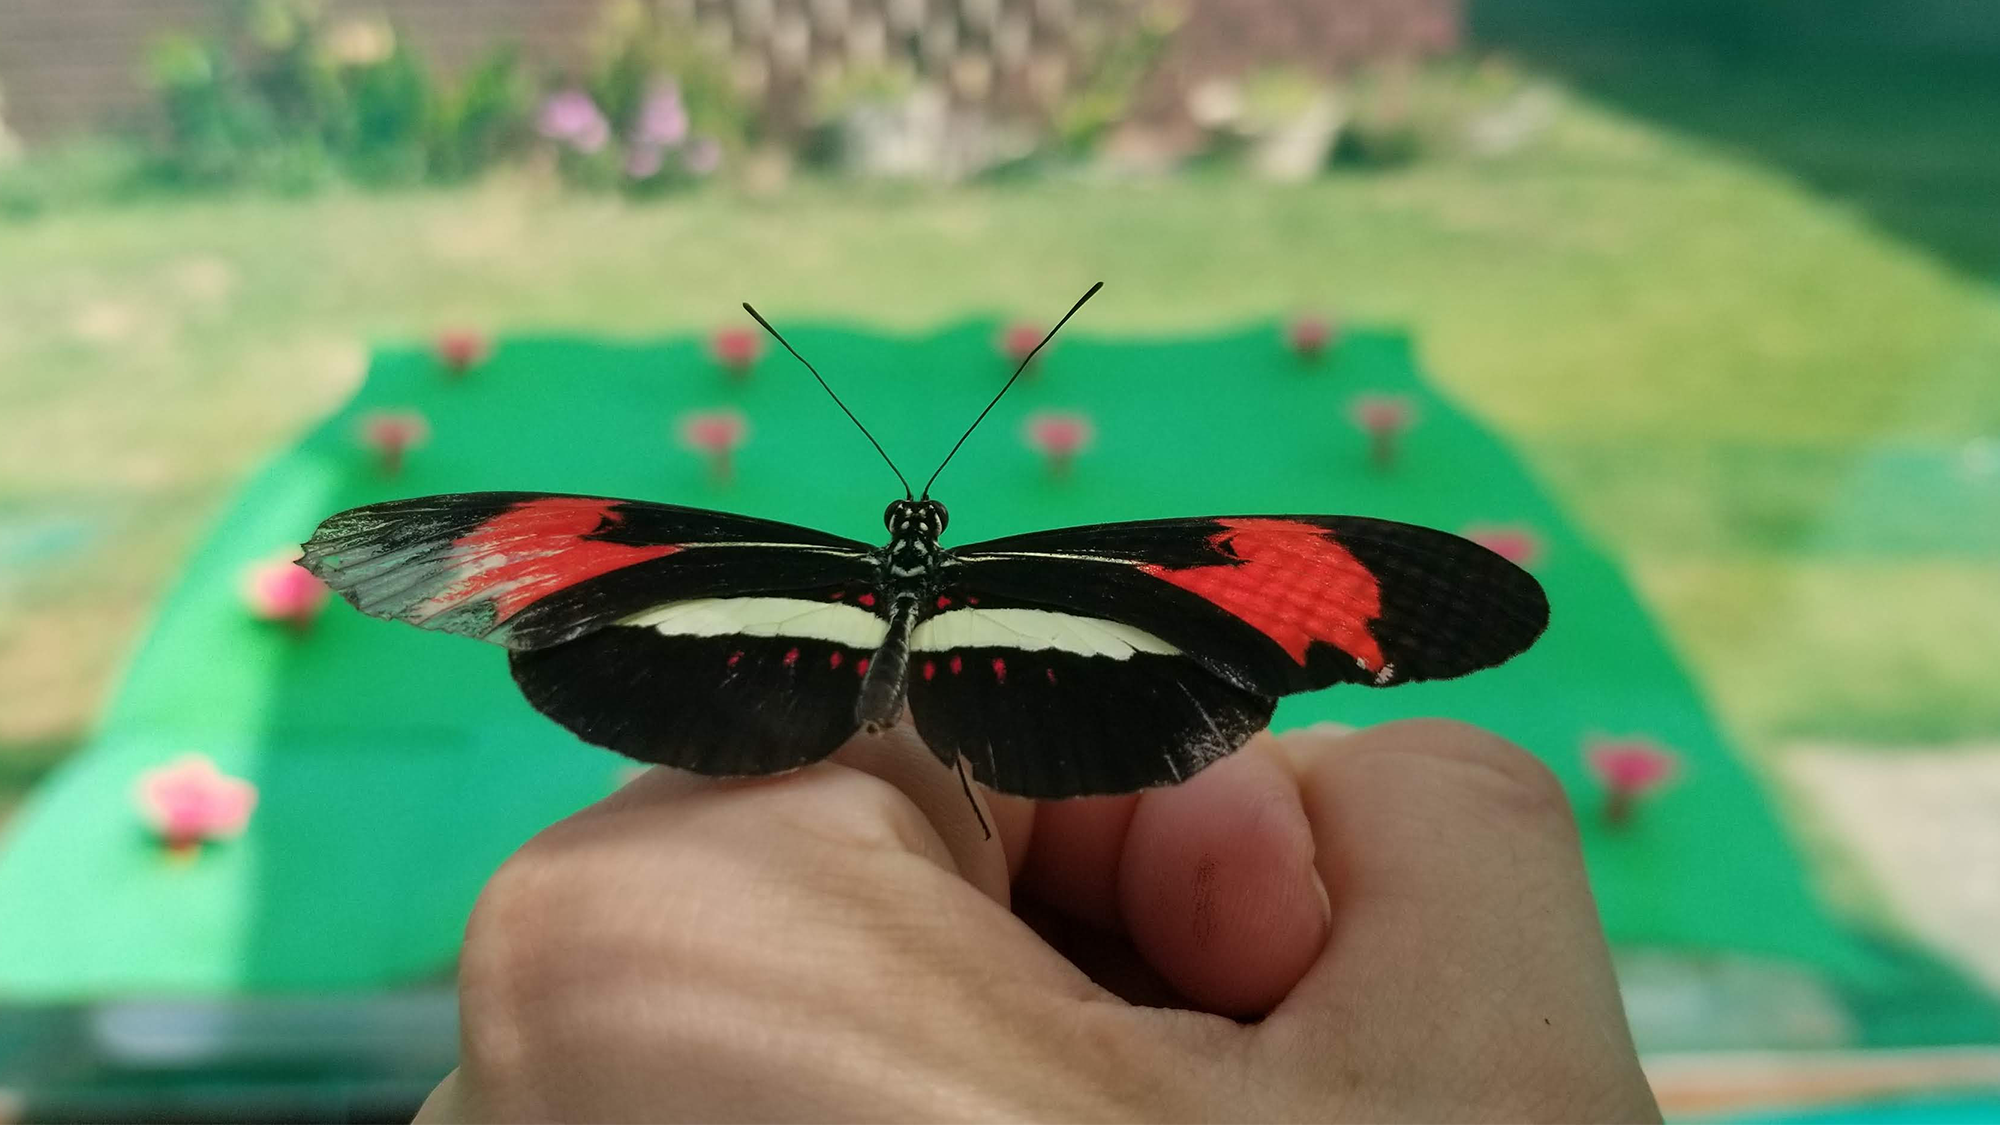 Butterflies can remember specific flower foraging routes